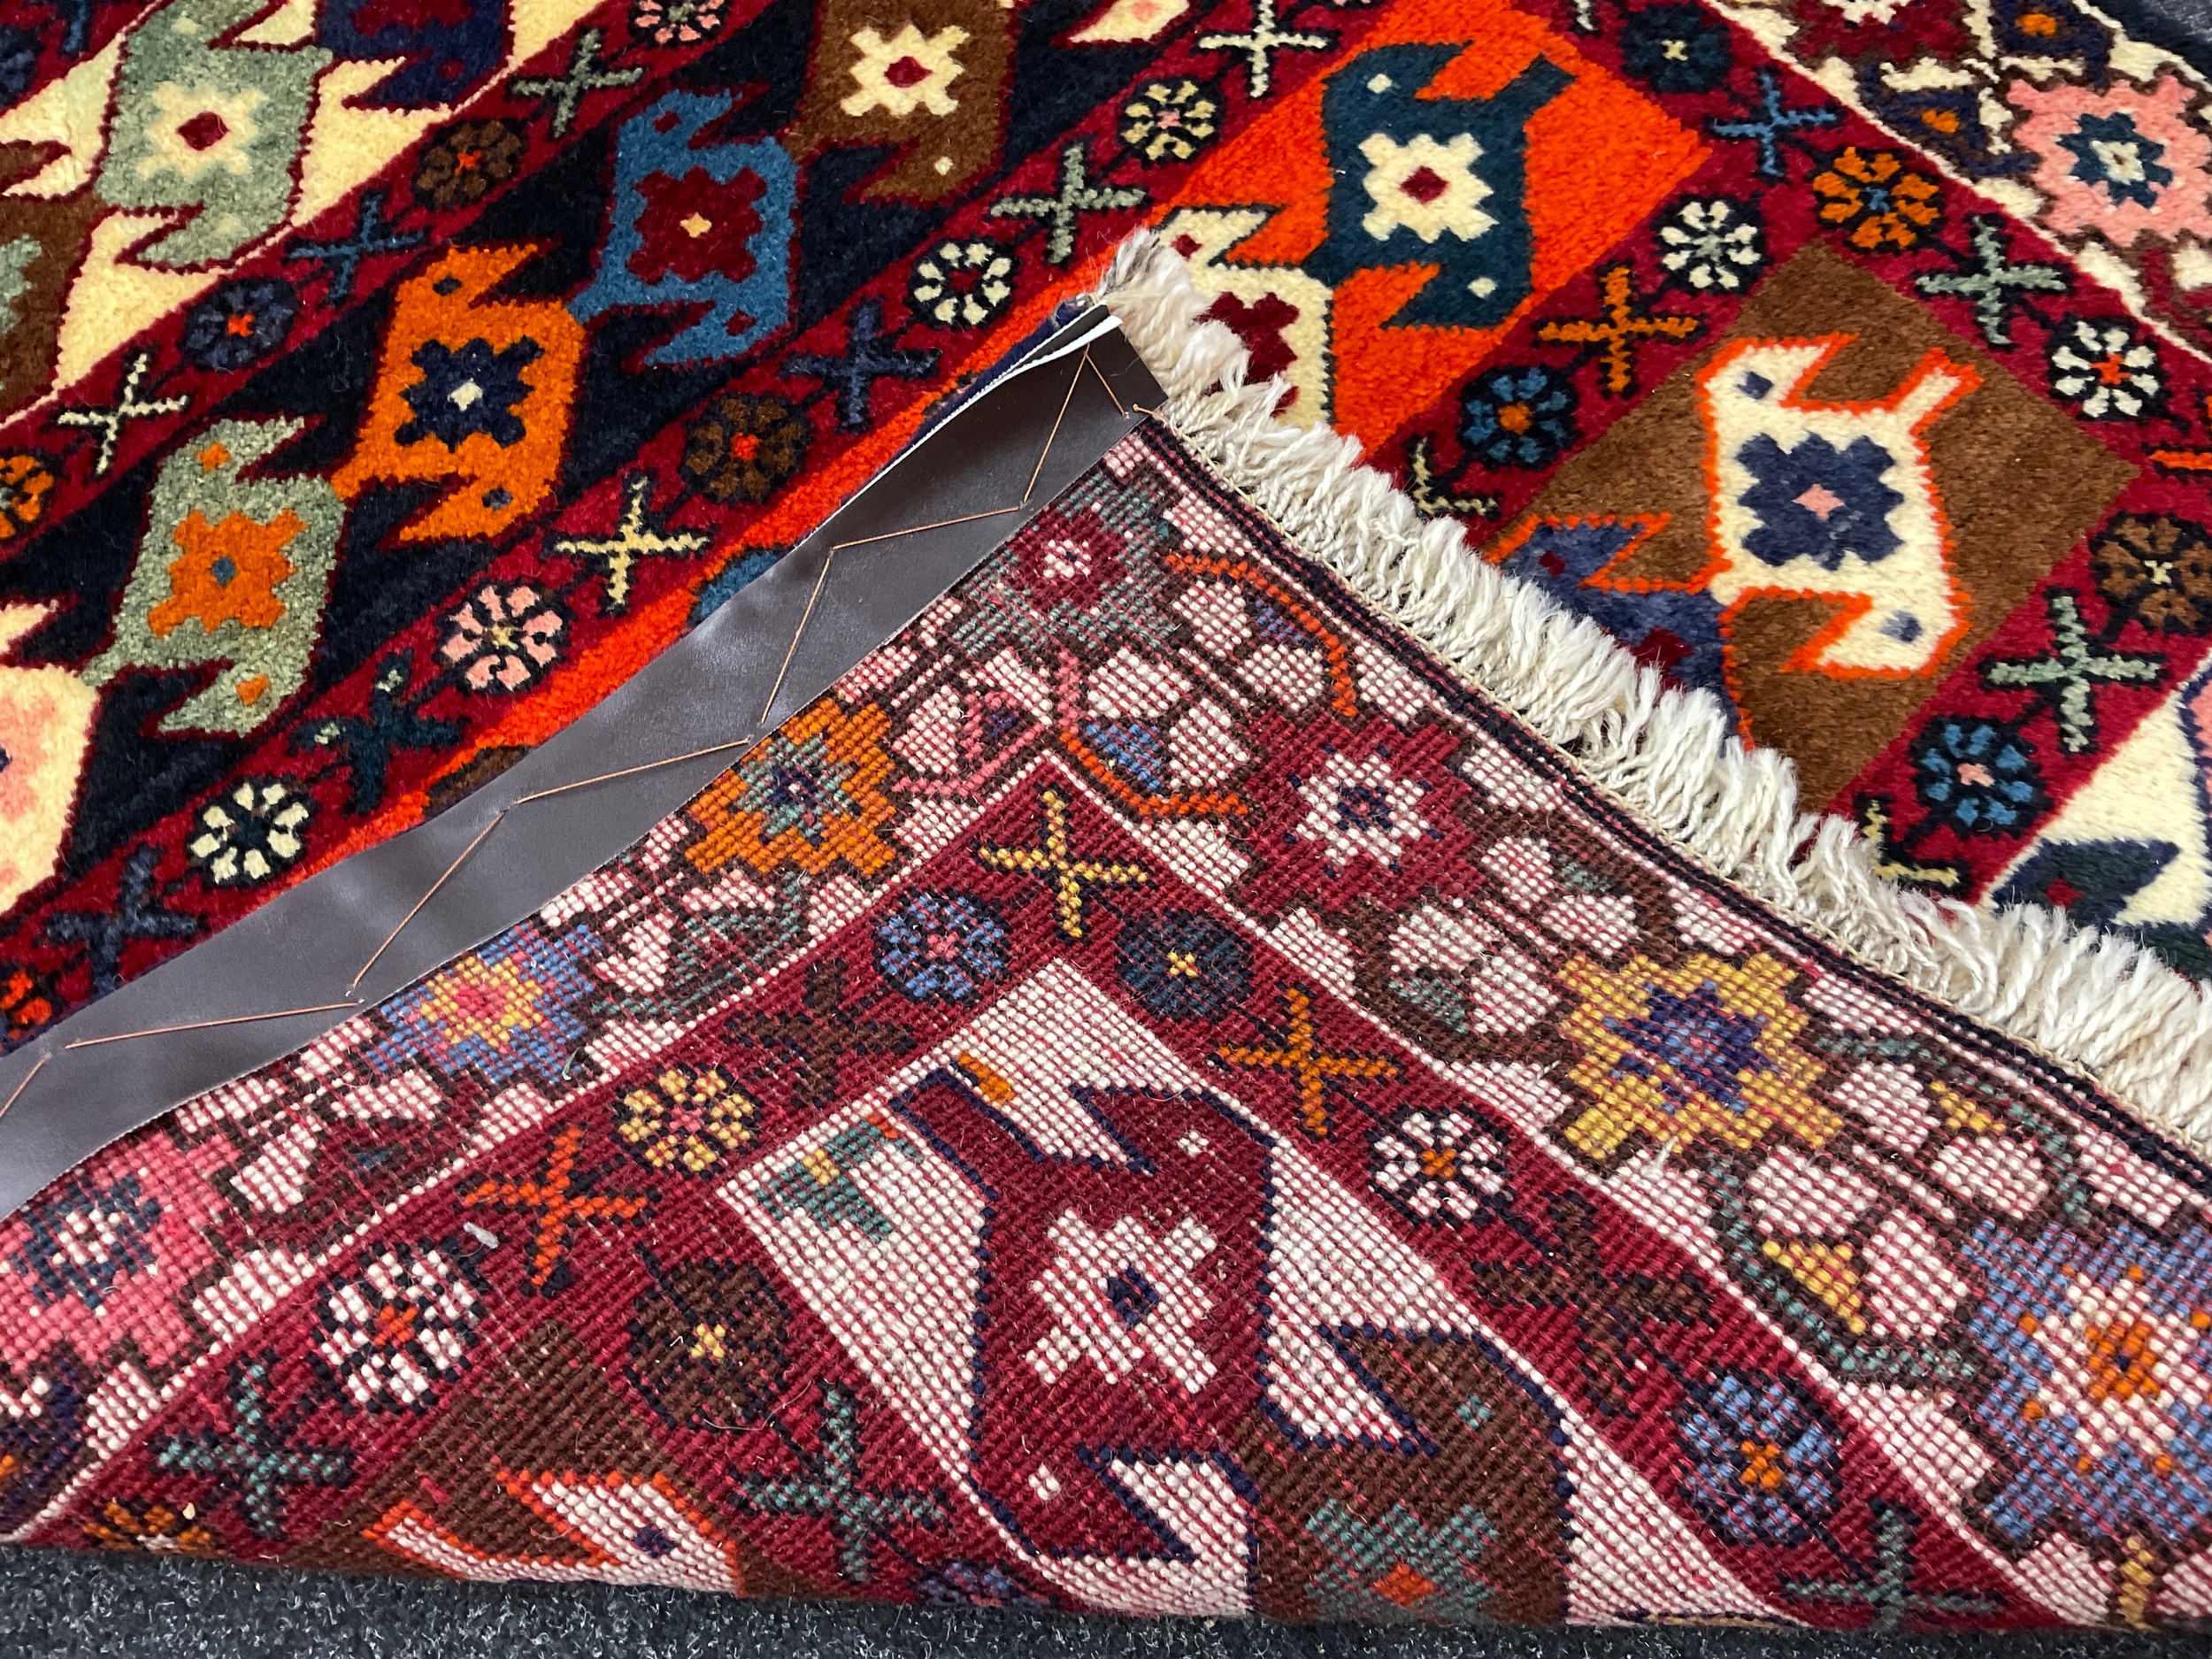 A North-west Persian Yallemeh rug / carpet, hand-knotted in rich tones of red, blue, orange, and - Image 2 of 2